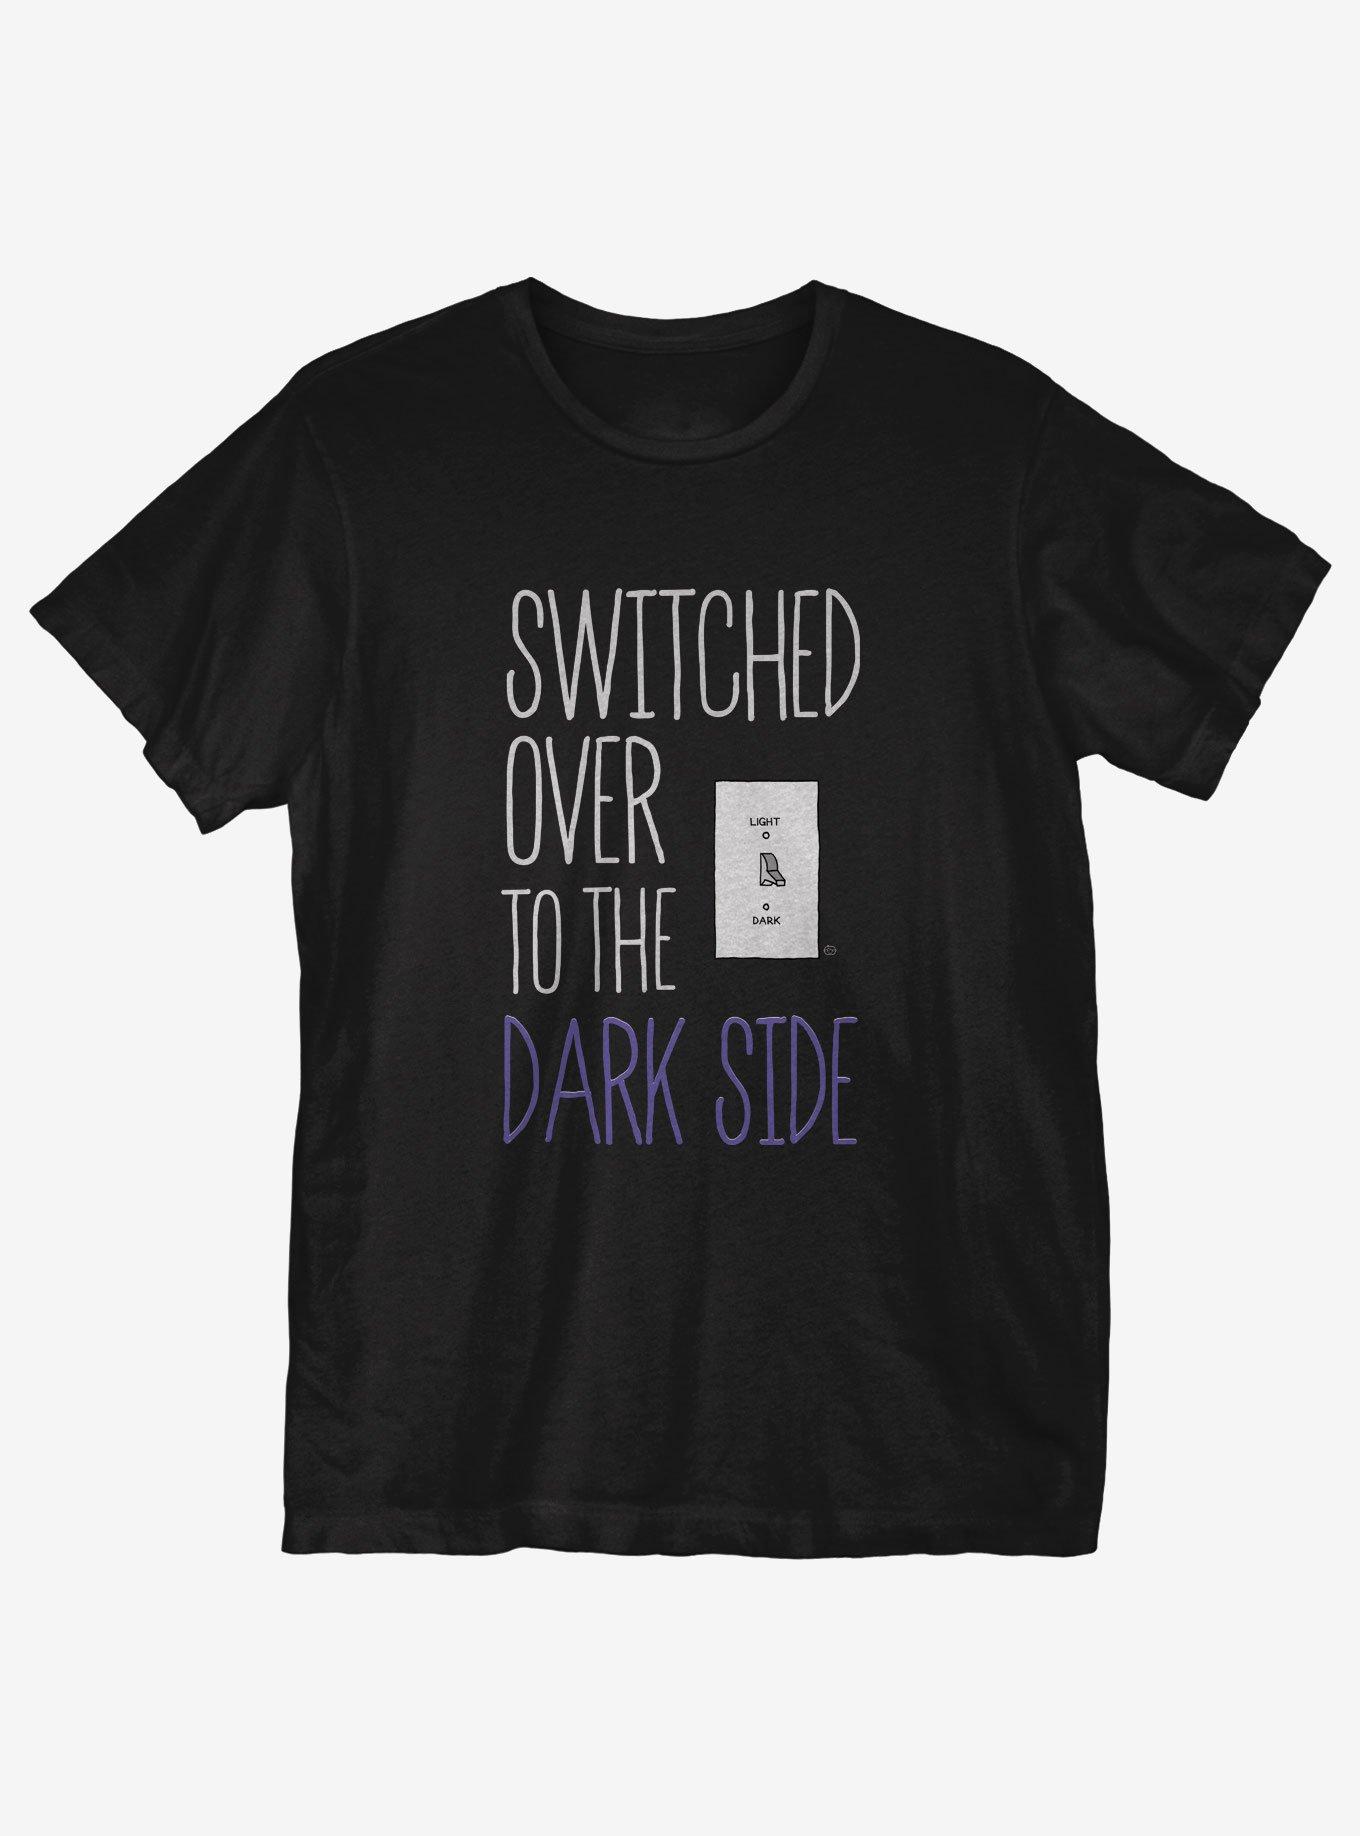 Switched Over To The Dark Side T-Shirt, BLACK, hi-res